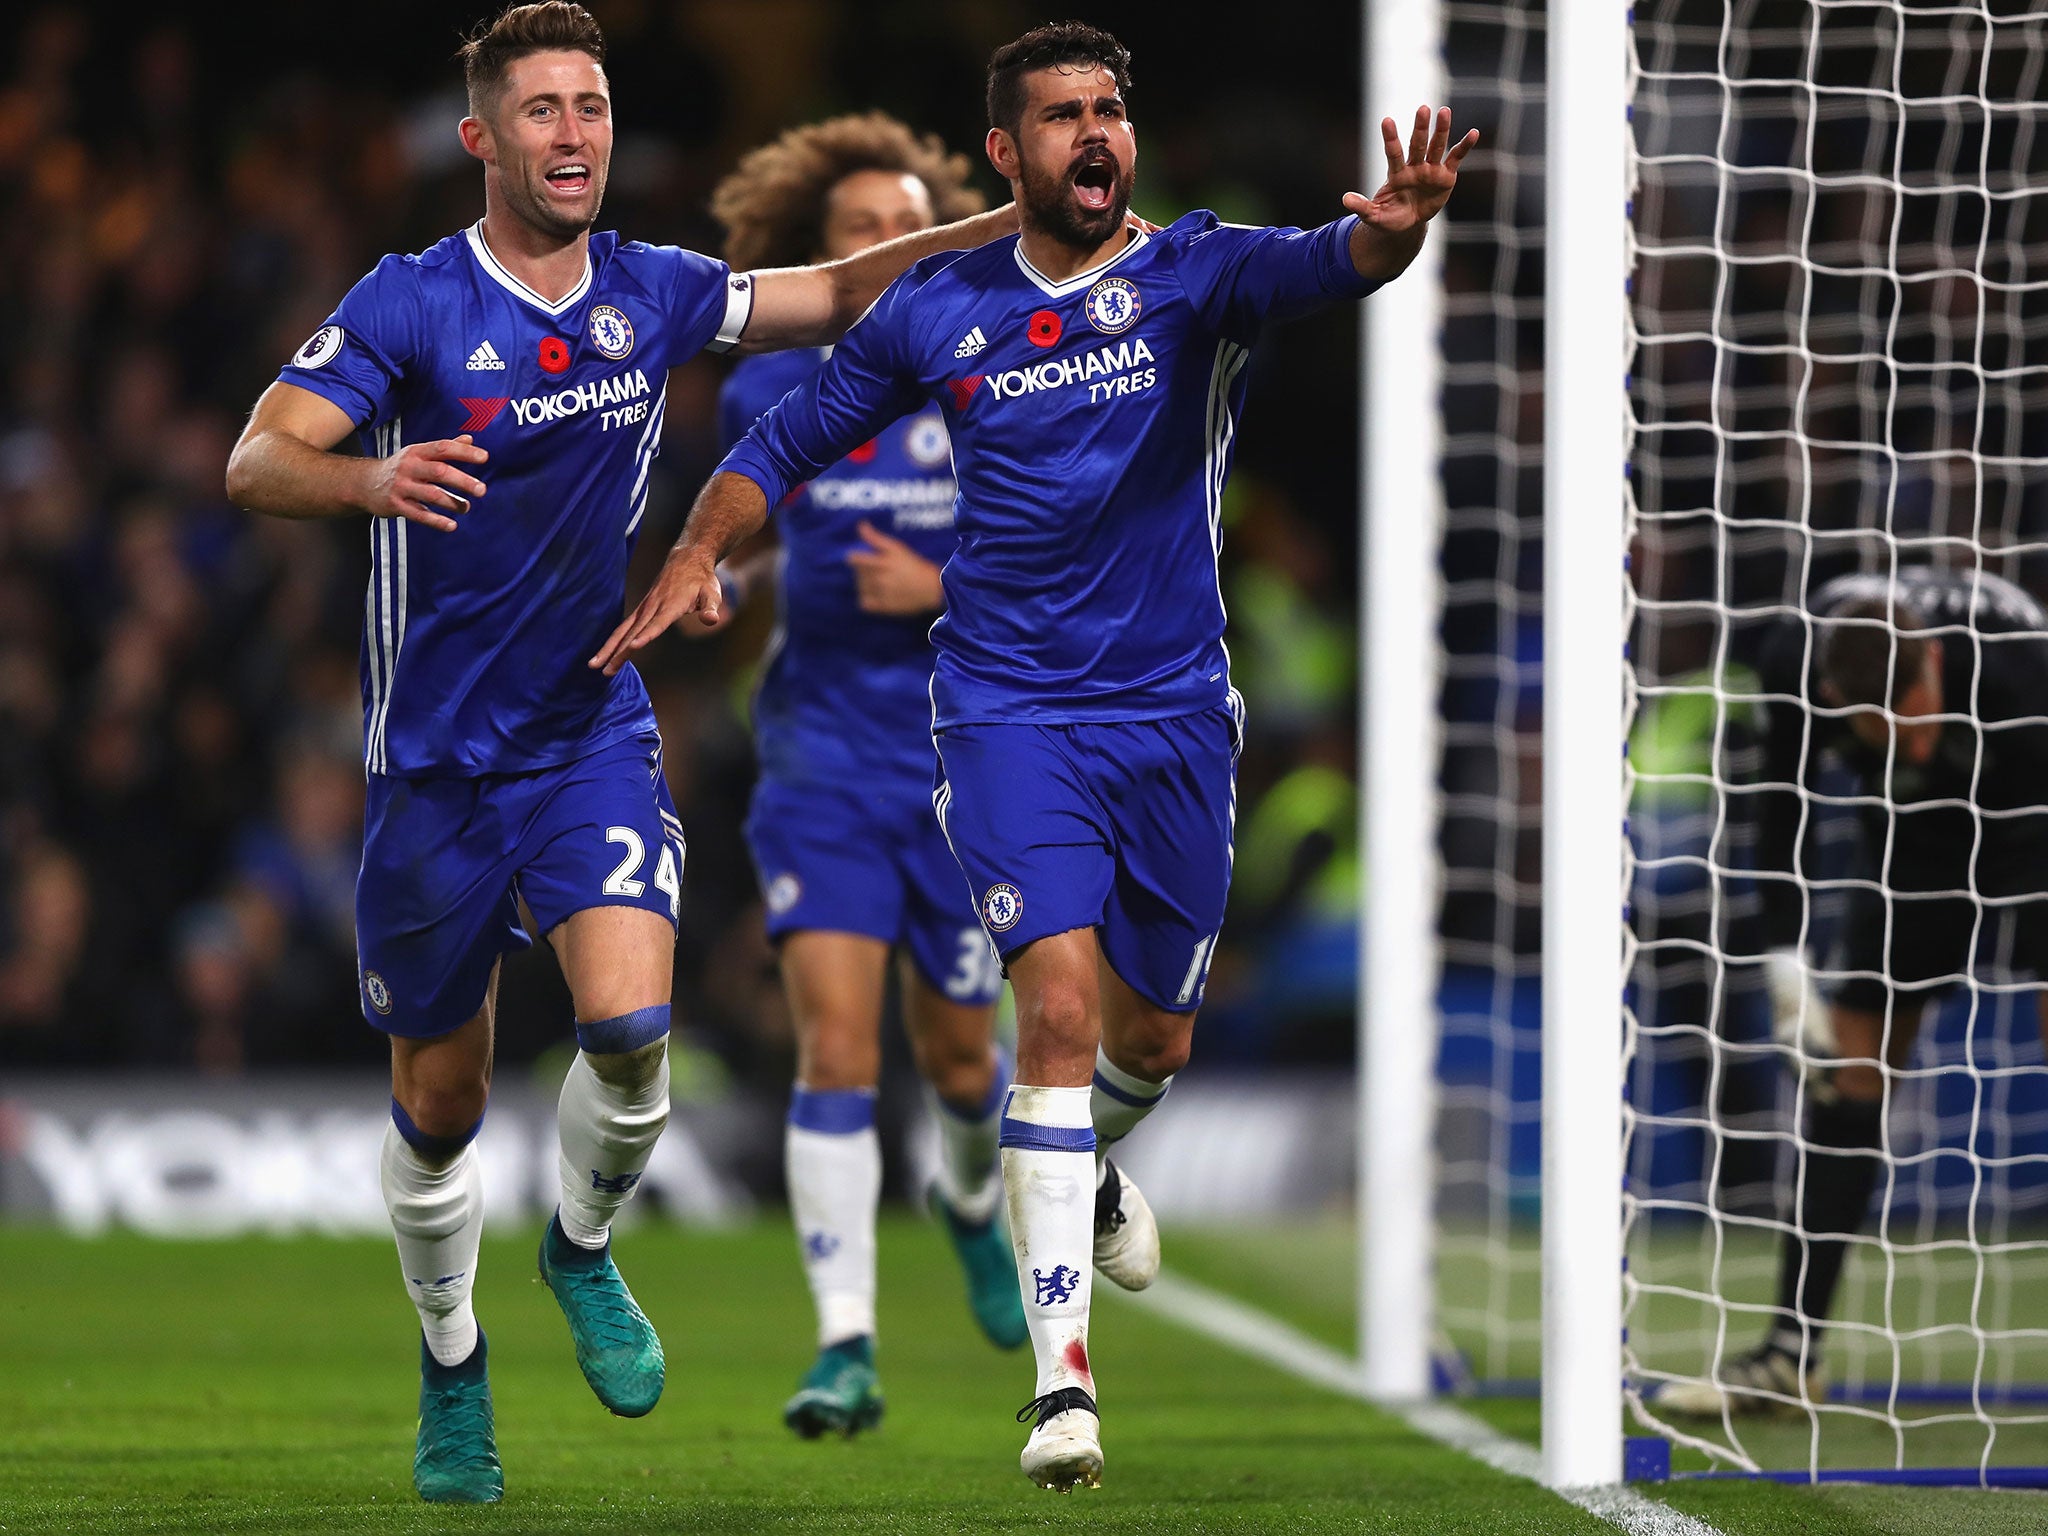 Diego Costa has grown into an 'example' to his Chelsea teammates, according to manager Antonio Conte